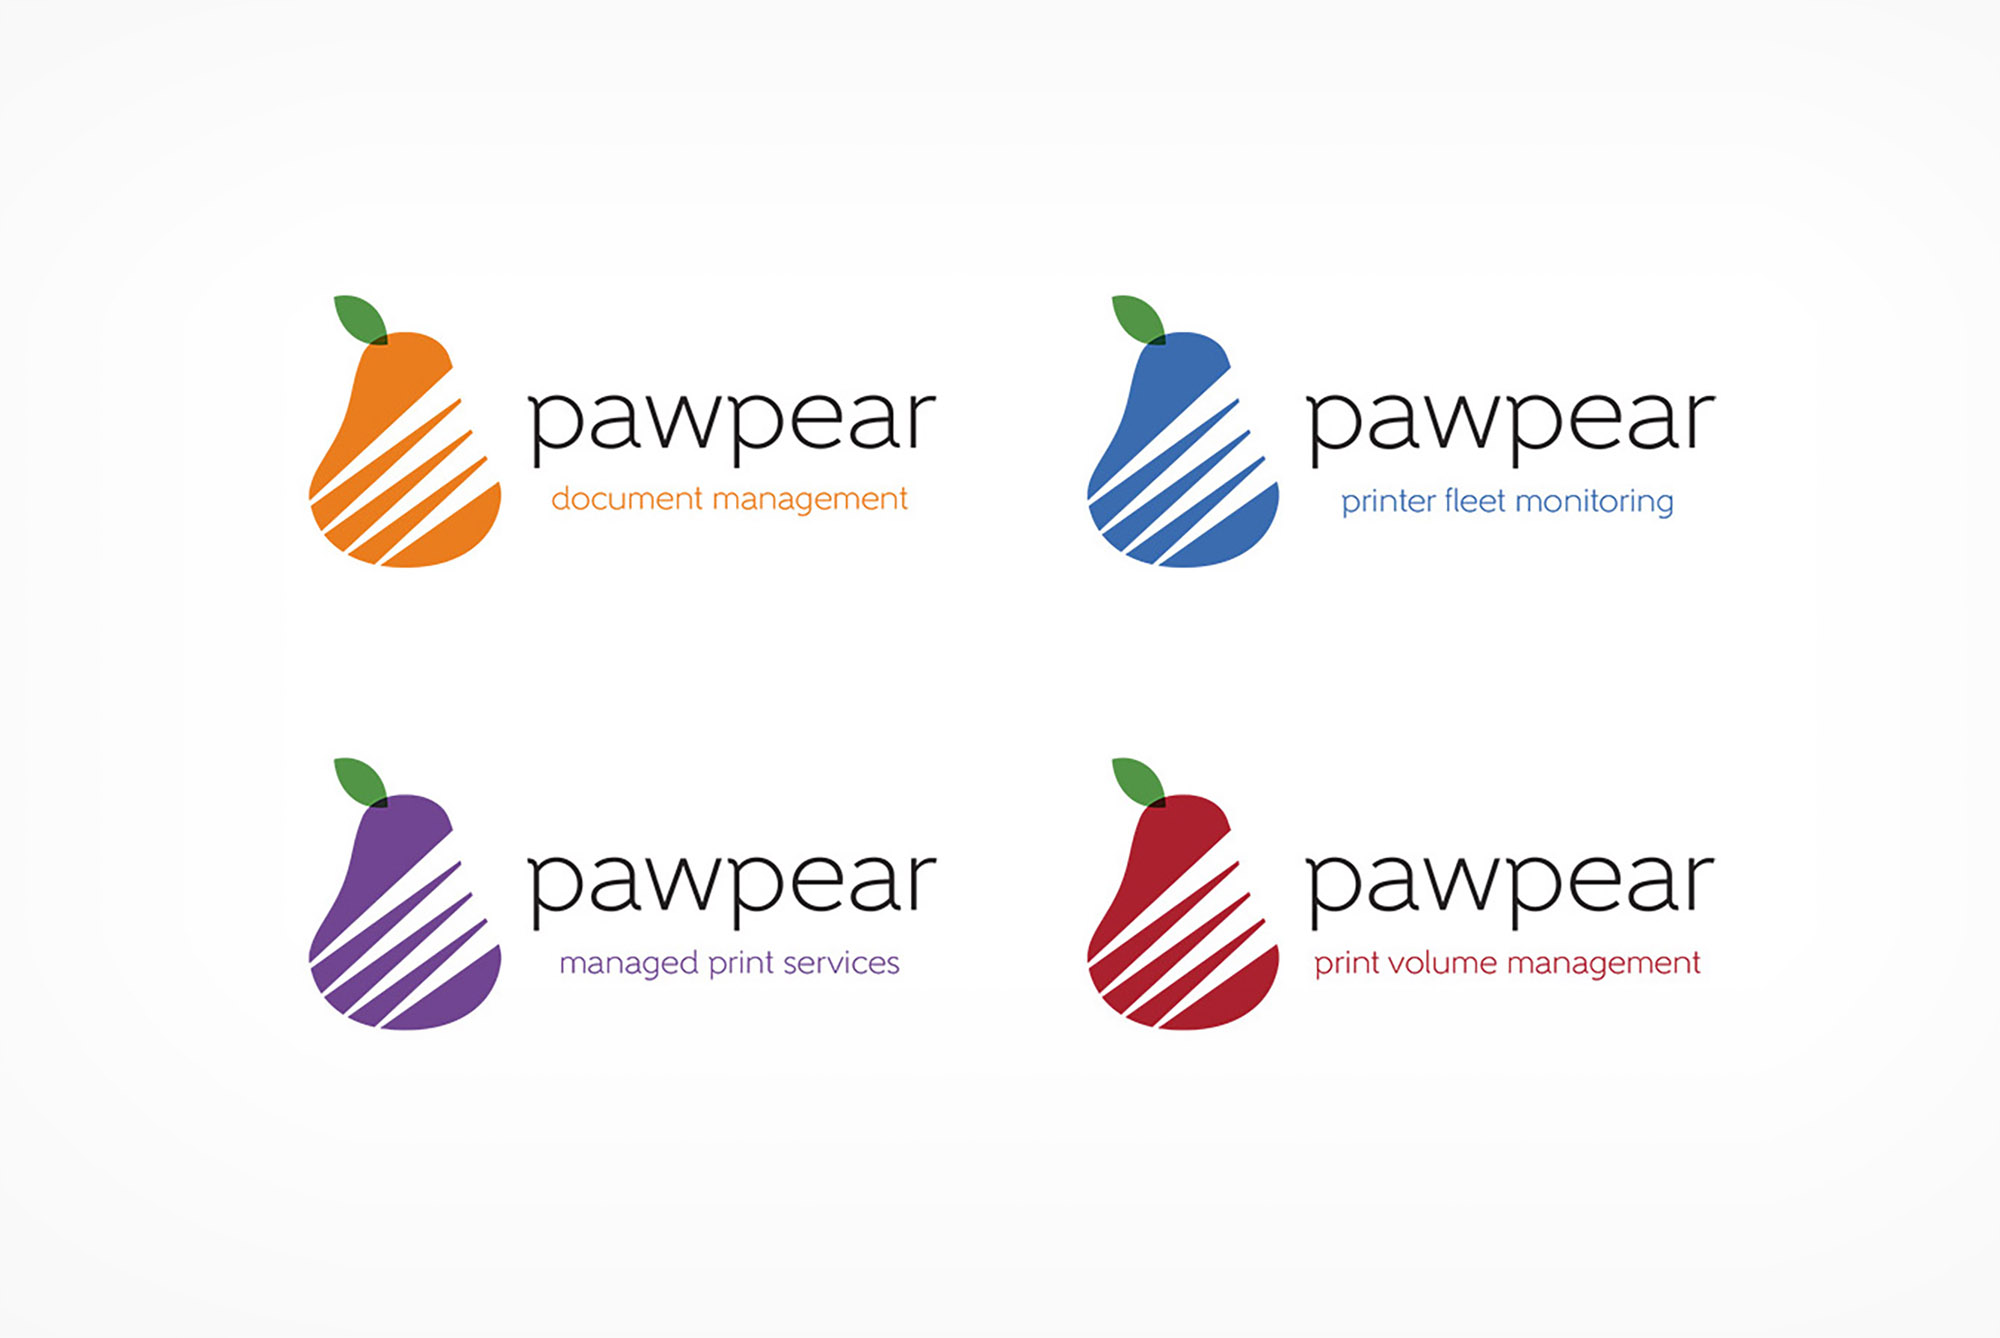 Pawpear | Efficient Print solutions secondary brand logos.